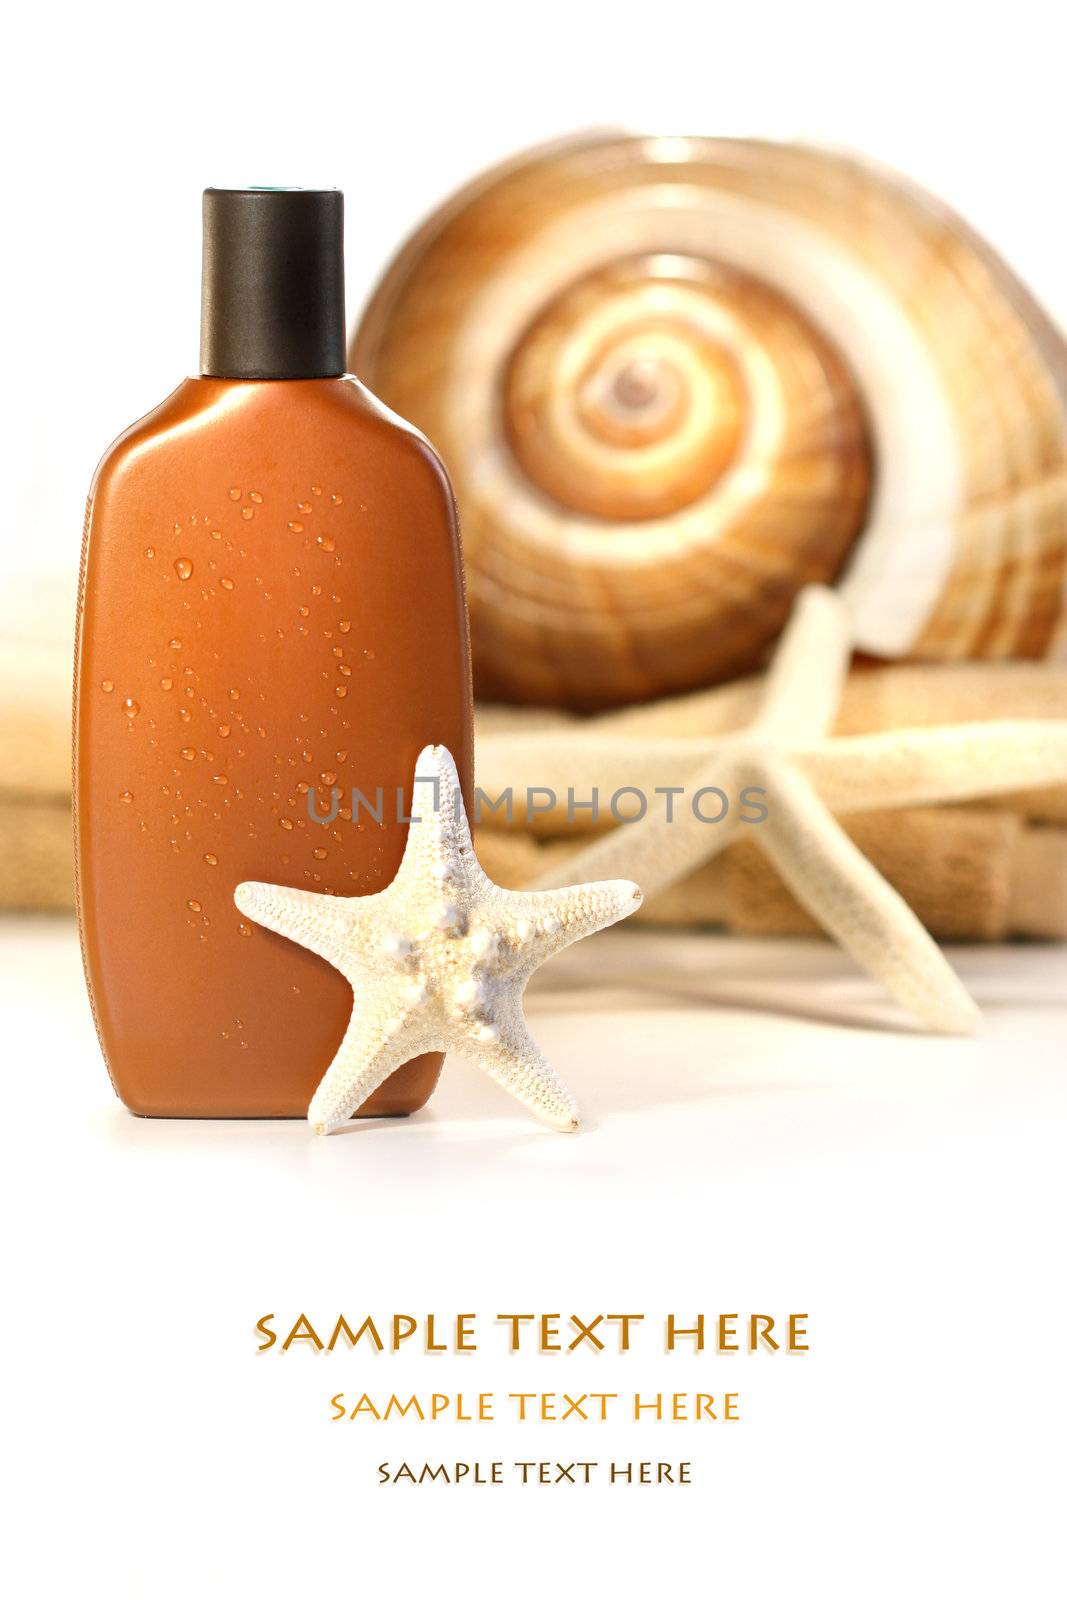 Sun lotion with seashells and towel on white background